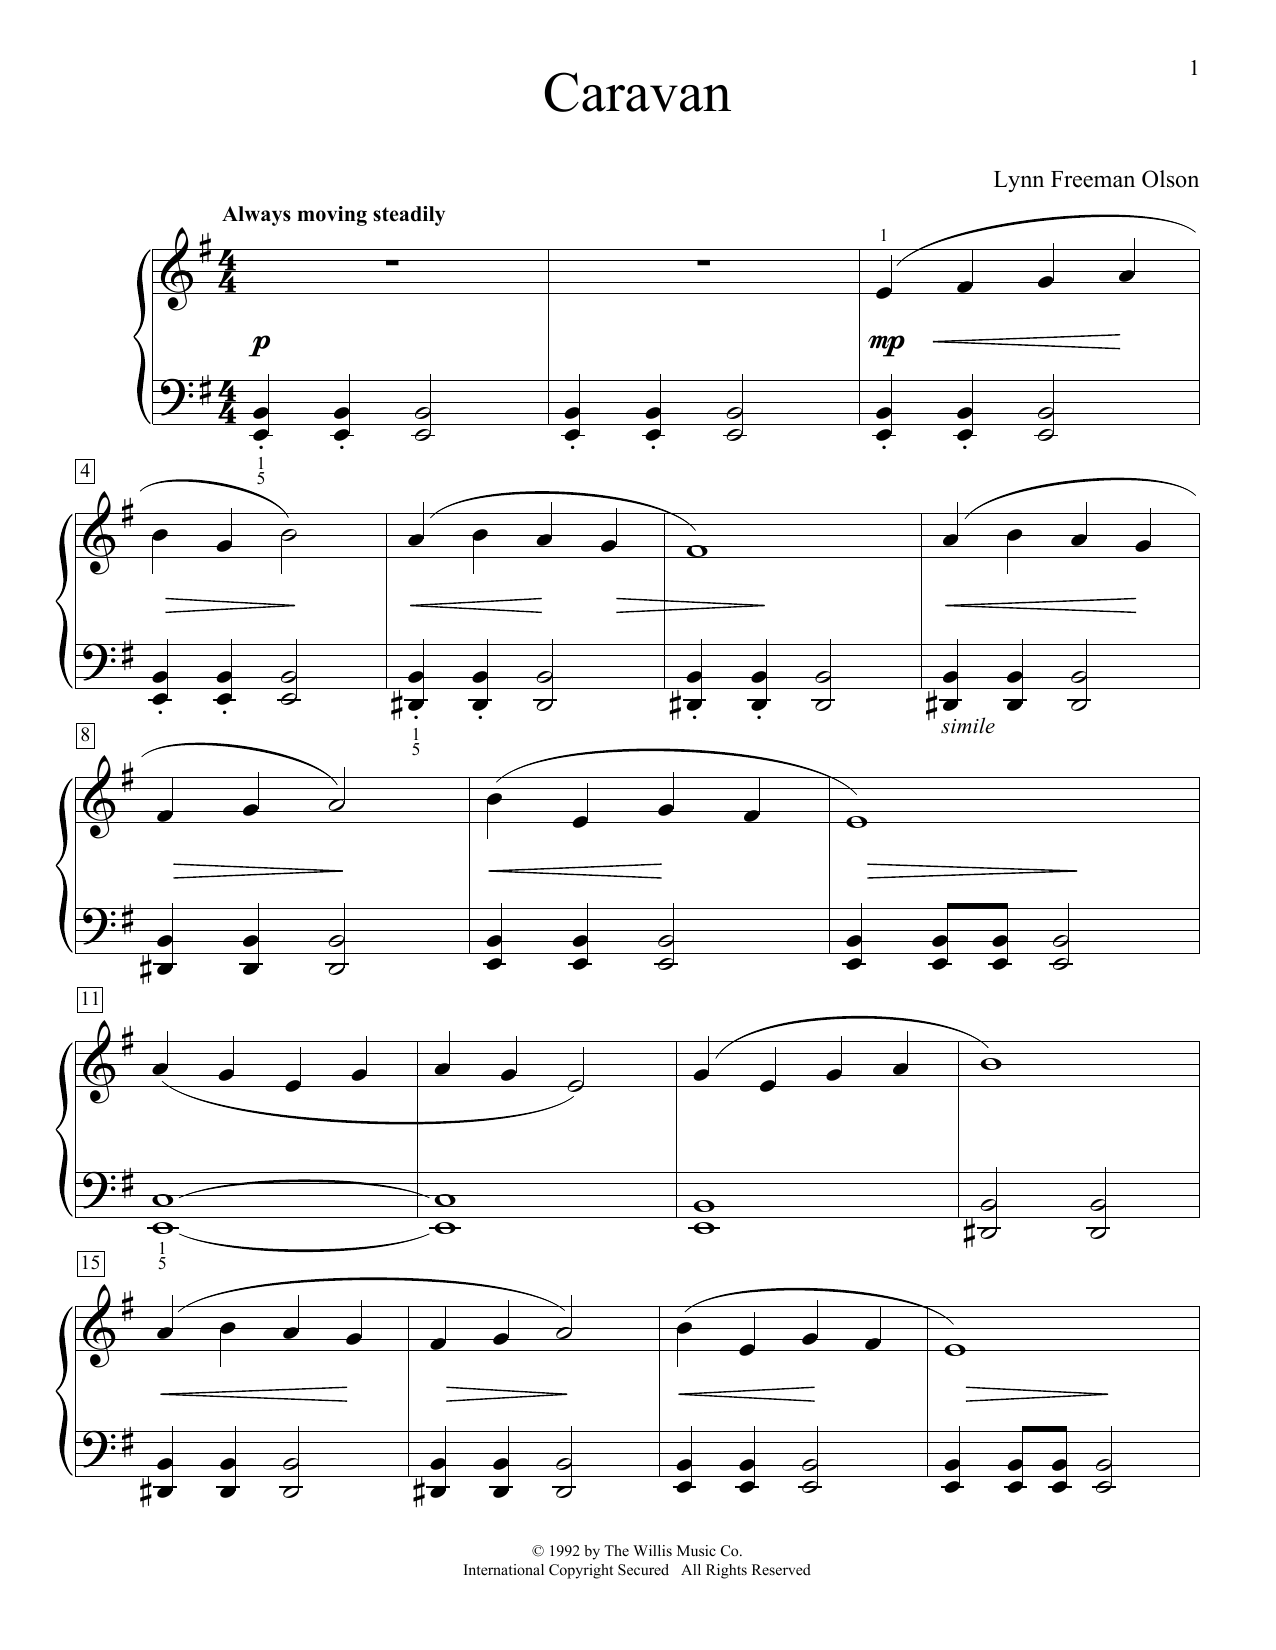 Lynn Freeman Olson Caravan sheet music preview music notes and score for Educational Piano including 3 page(s)